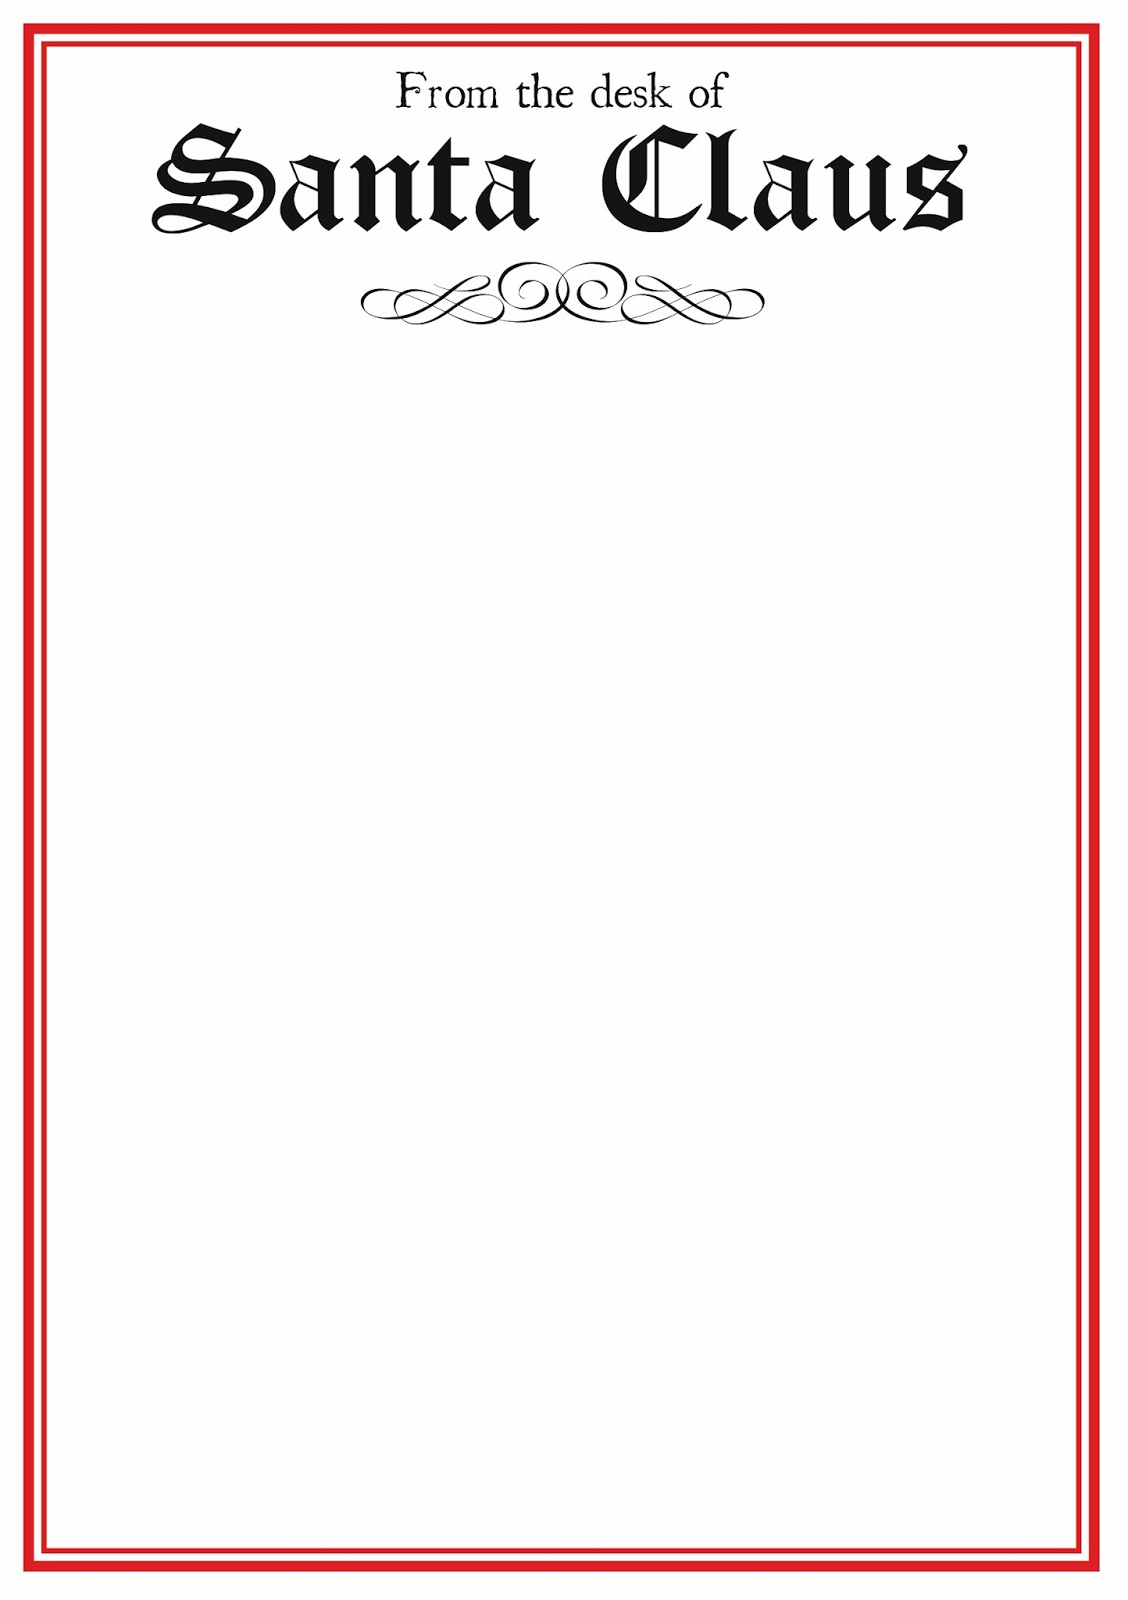 Free Printable Letter From Santa Word Template Samples | Letter - Free Printable Letter From Santa Template